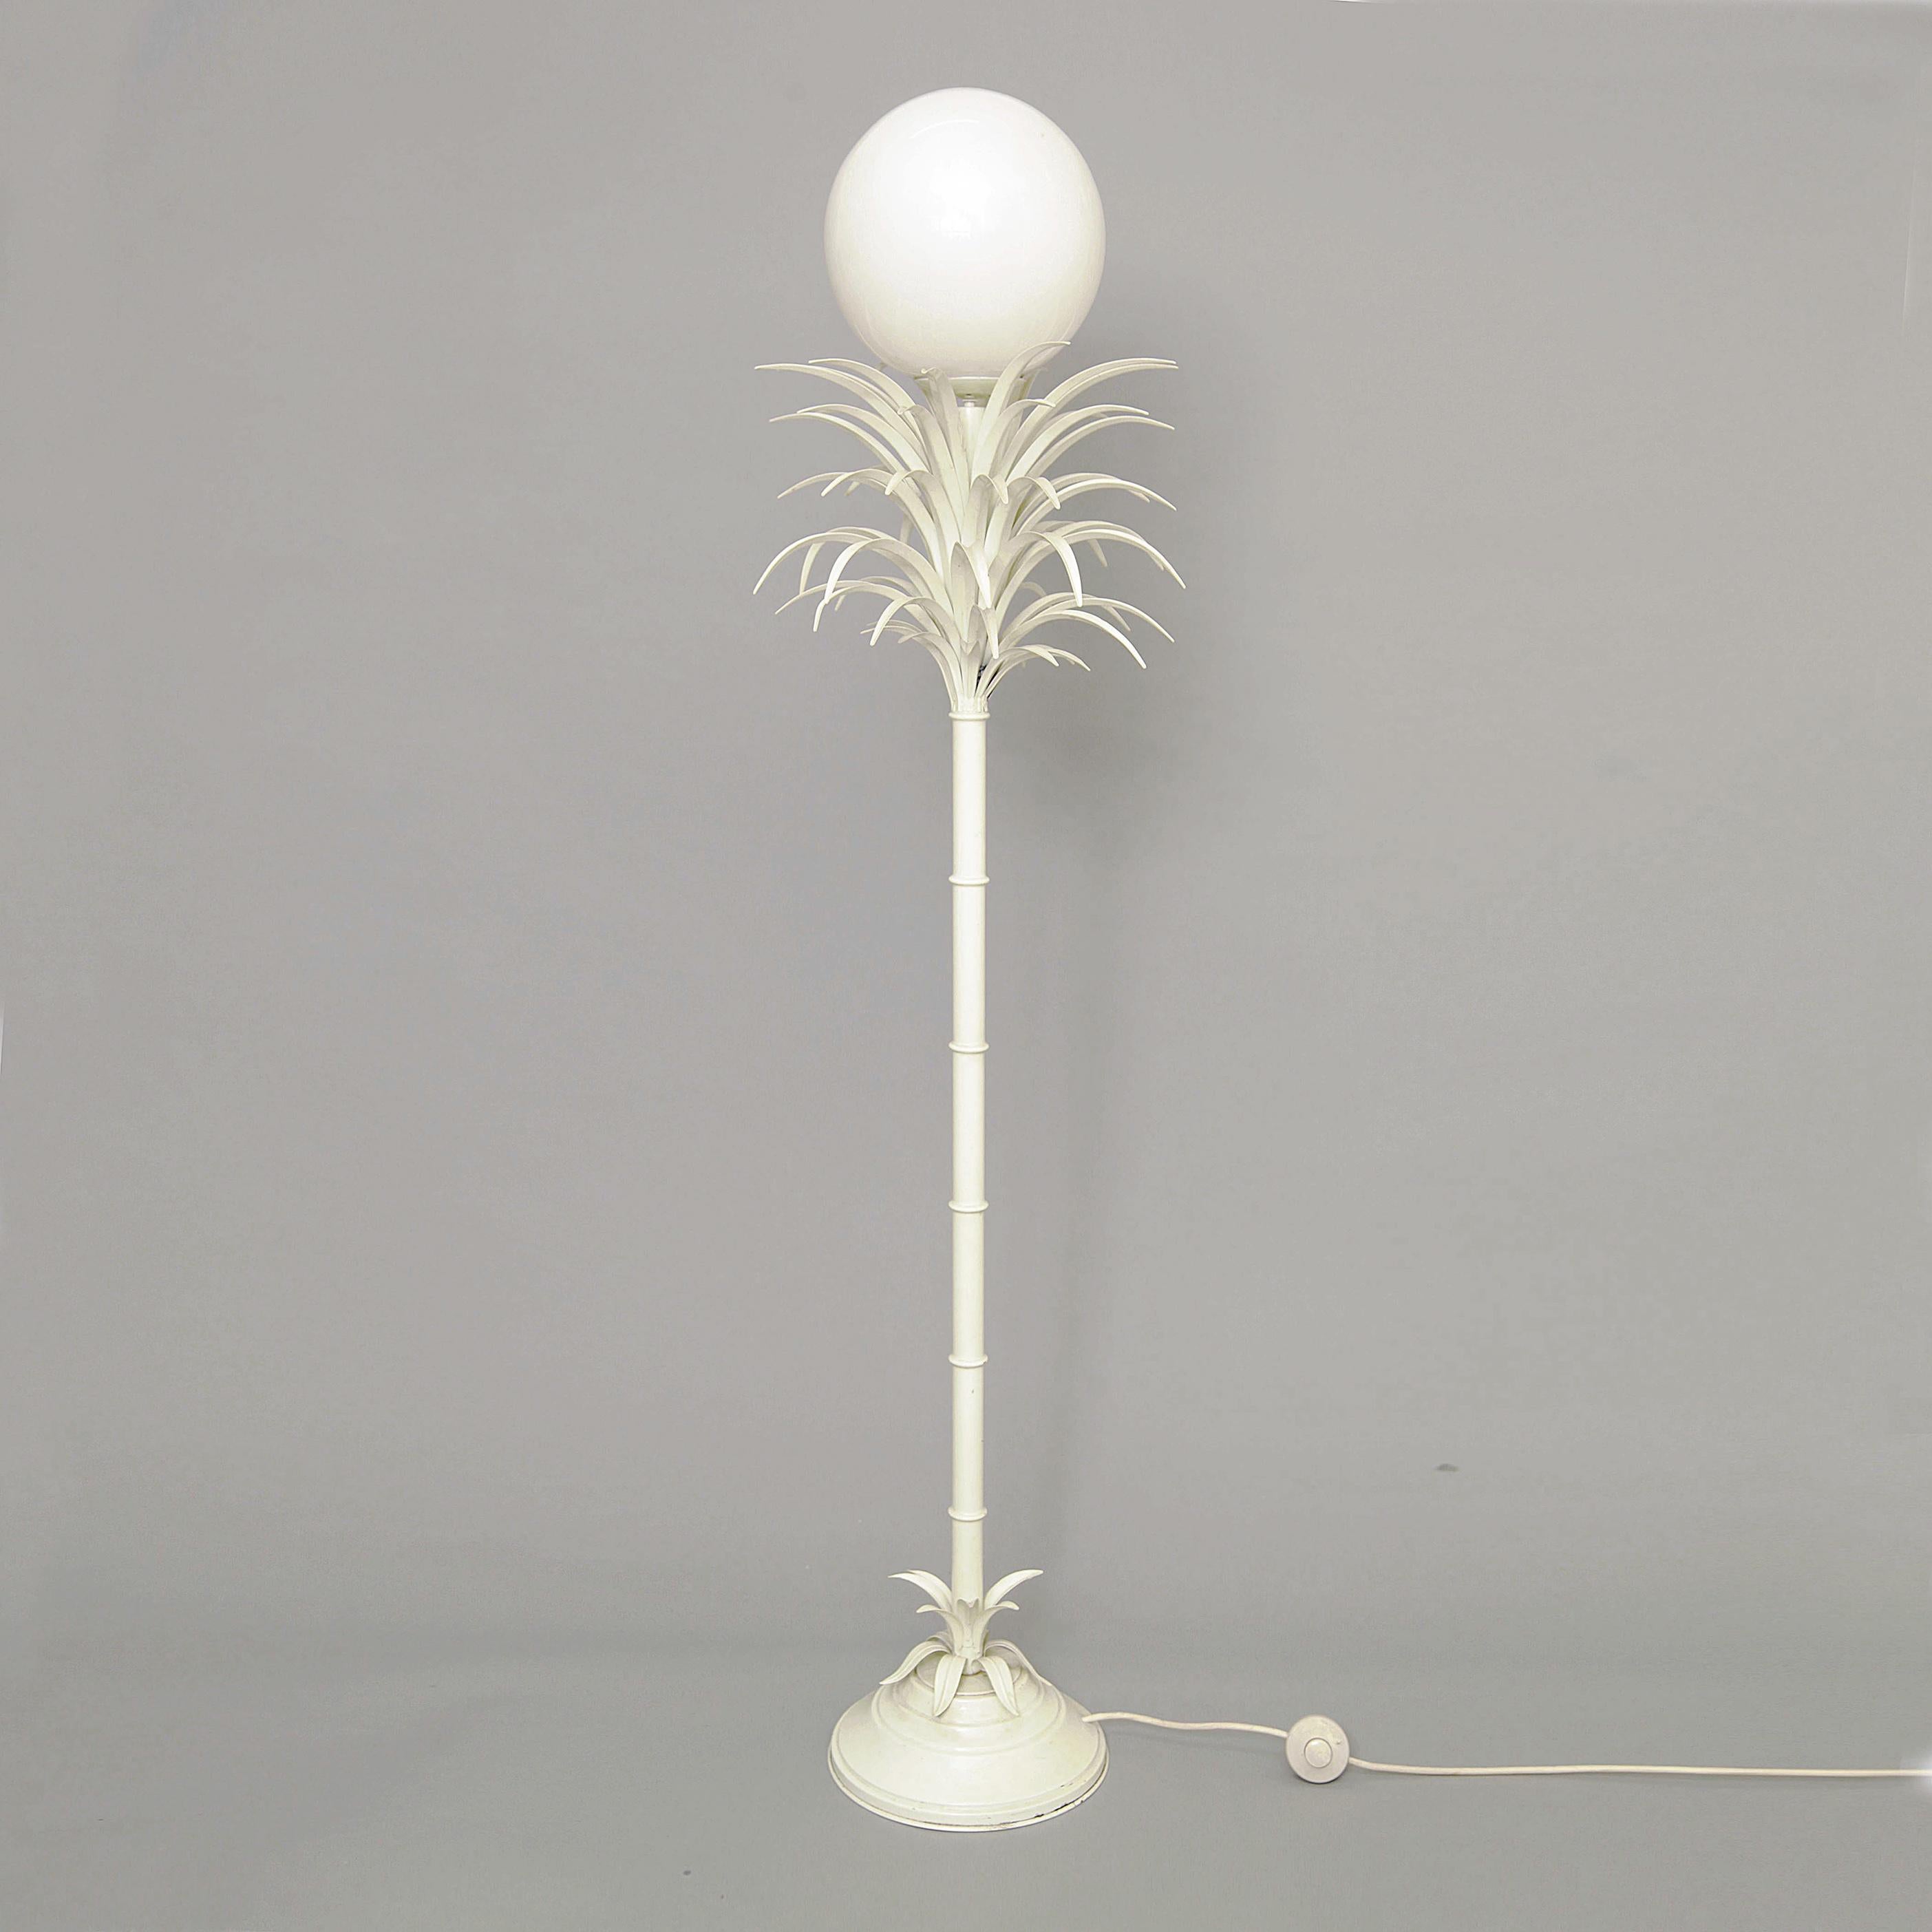 Floor lamp designed by Sergio Terzani in the shape of a palm tree, later painted in off white with a glass globe shade. Excellent quality but with some wear due to age.